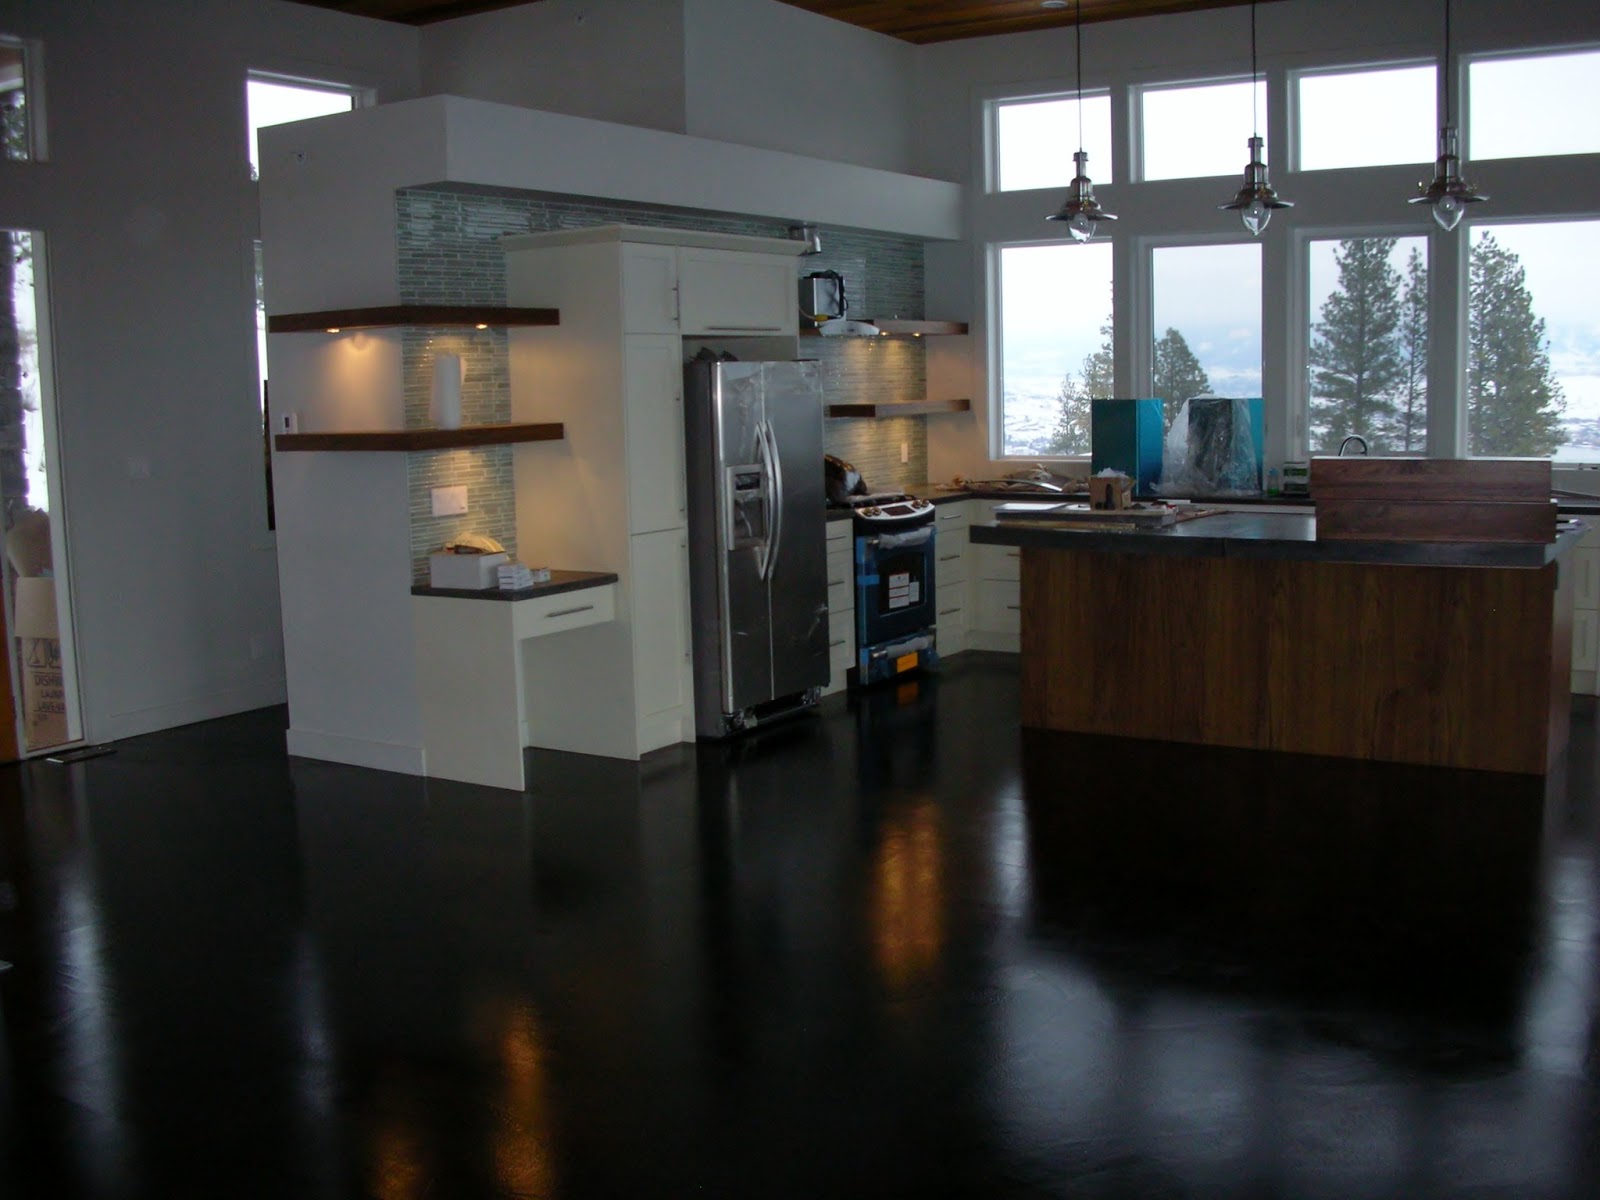 MODE CONCRETE: Considering Concrete Floors in the Kitchen ...